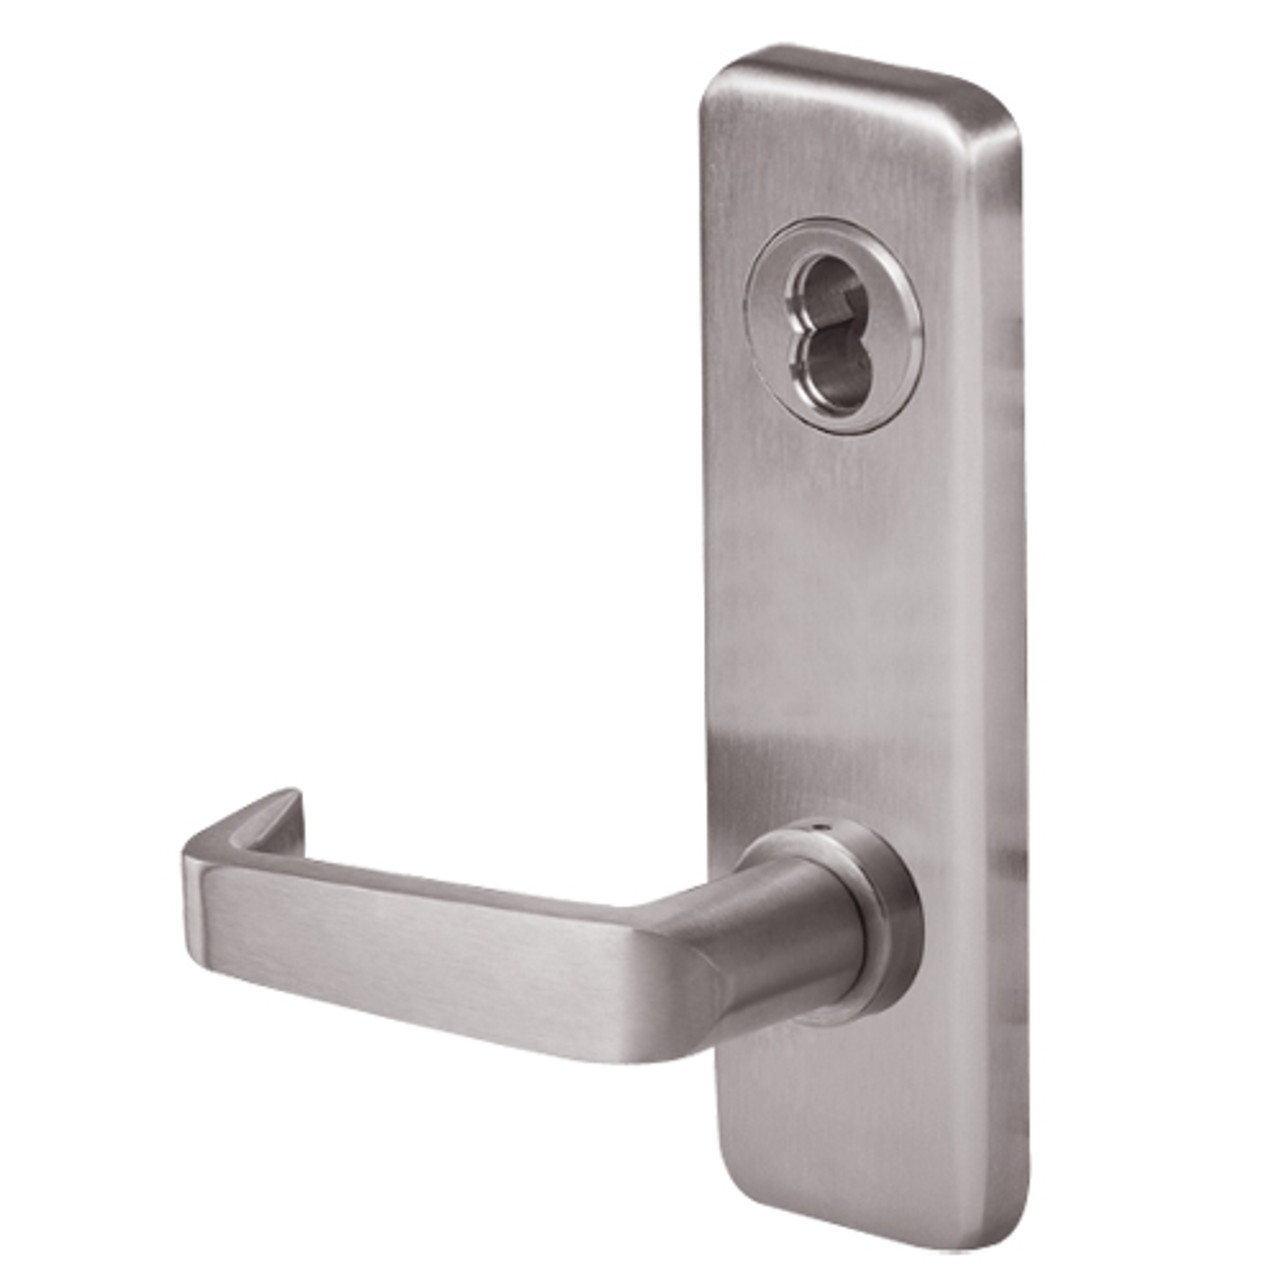 45H0LT15J630 Best 40H Series Privacy Heavy Duty Mortise Lever Lock with Contour with Angle Return Style in Satin Stainless Steel